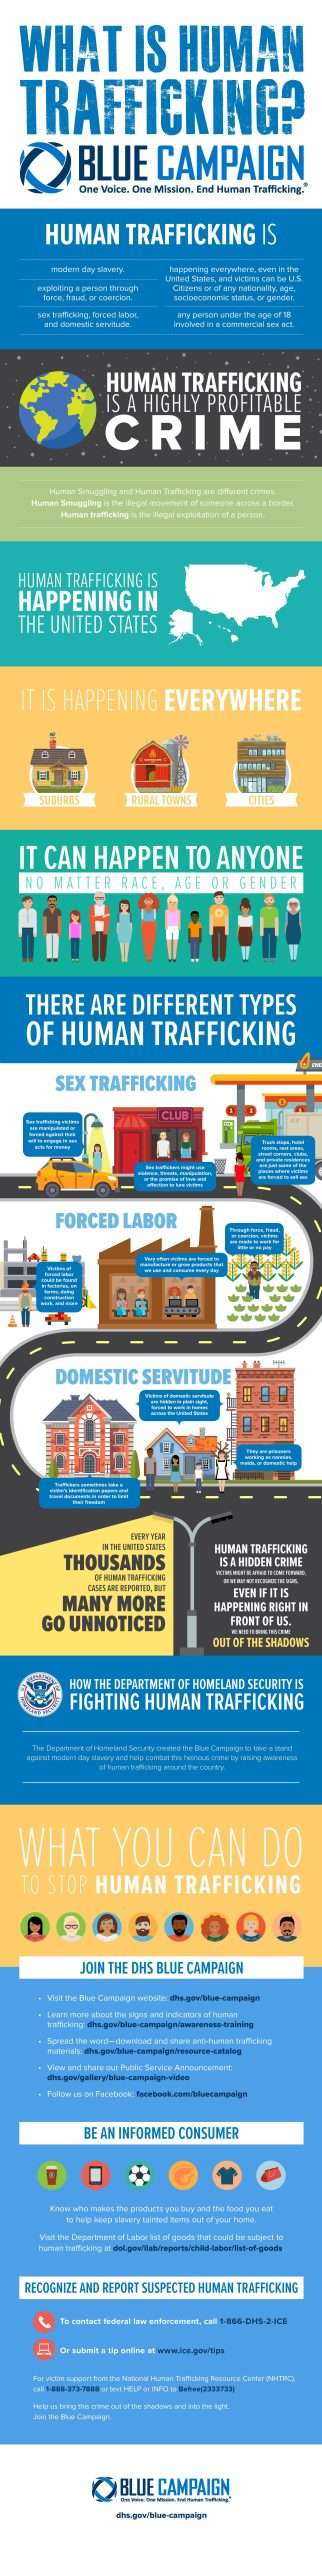 “What is Human Trafficking” infographic